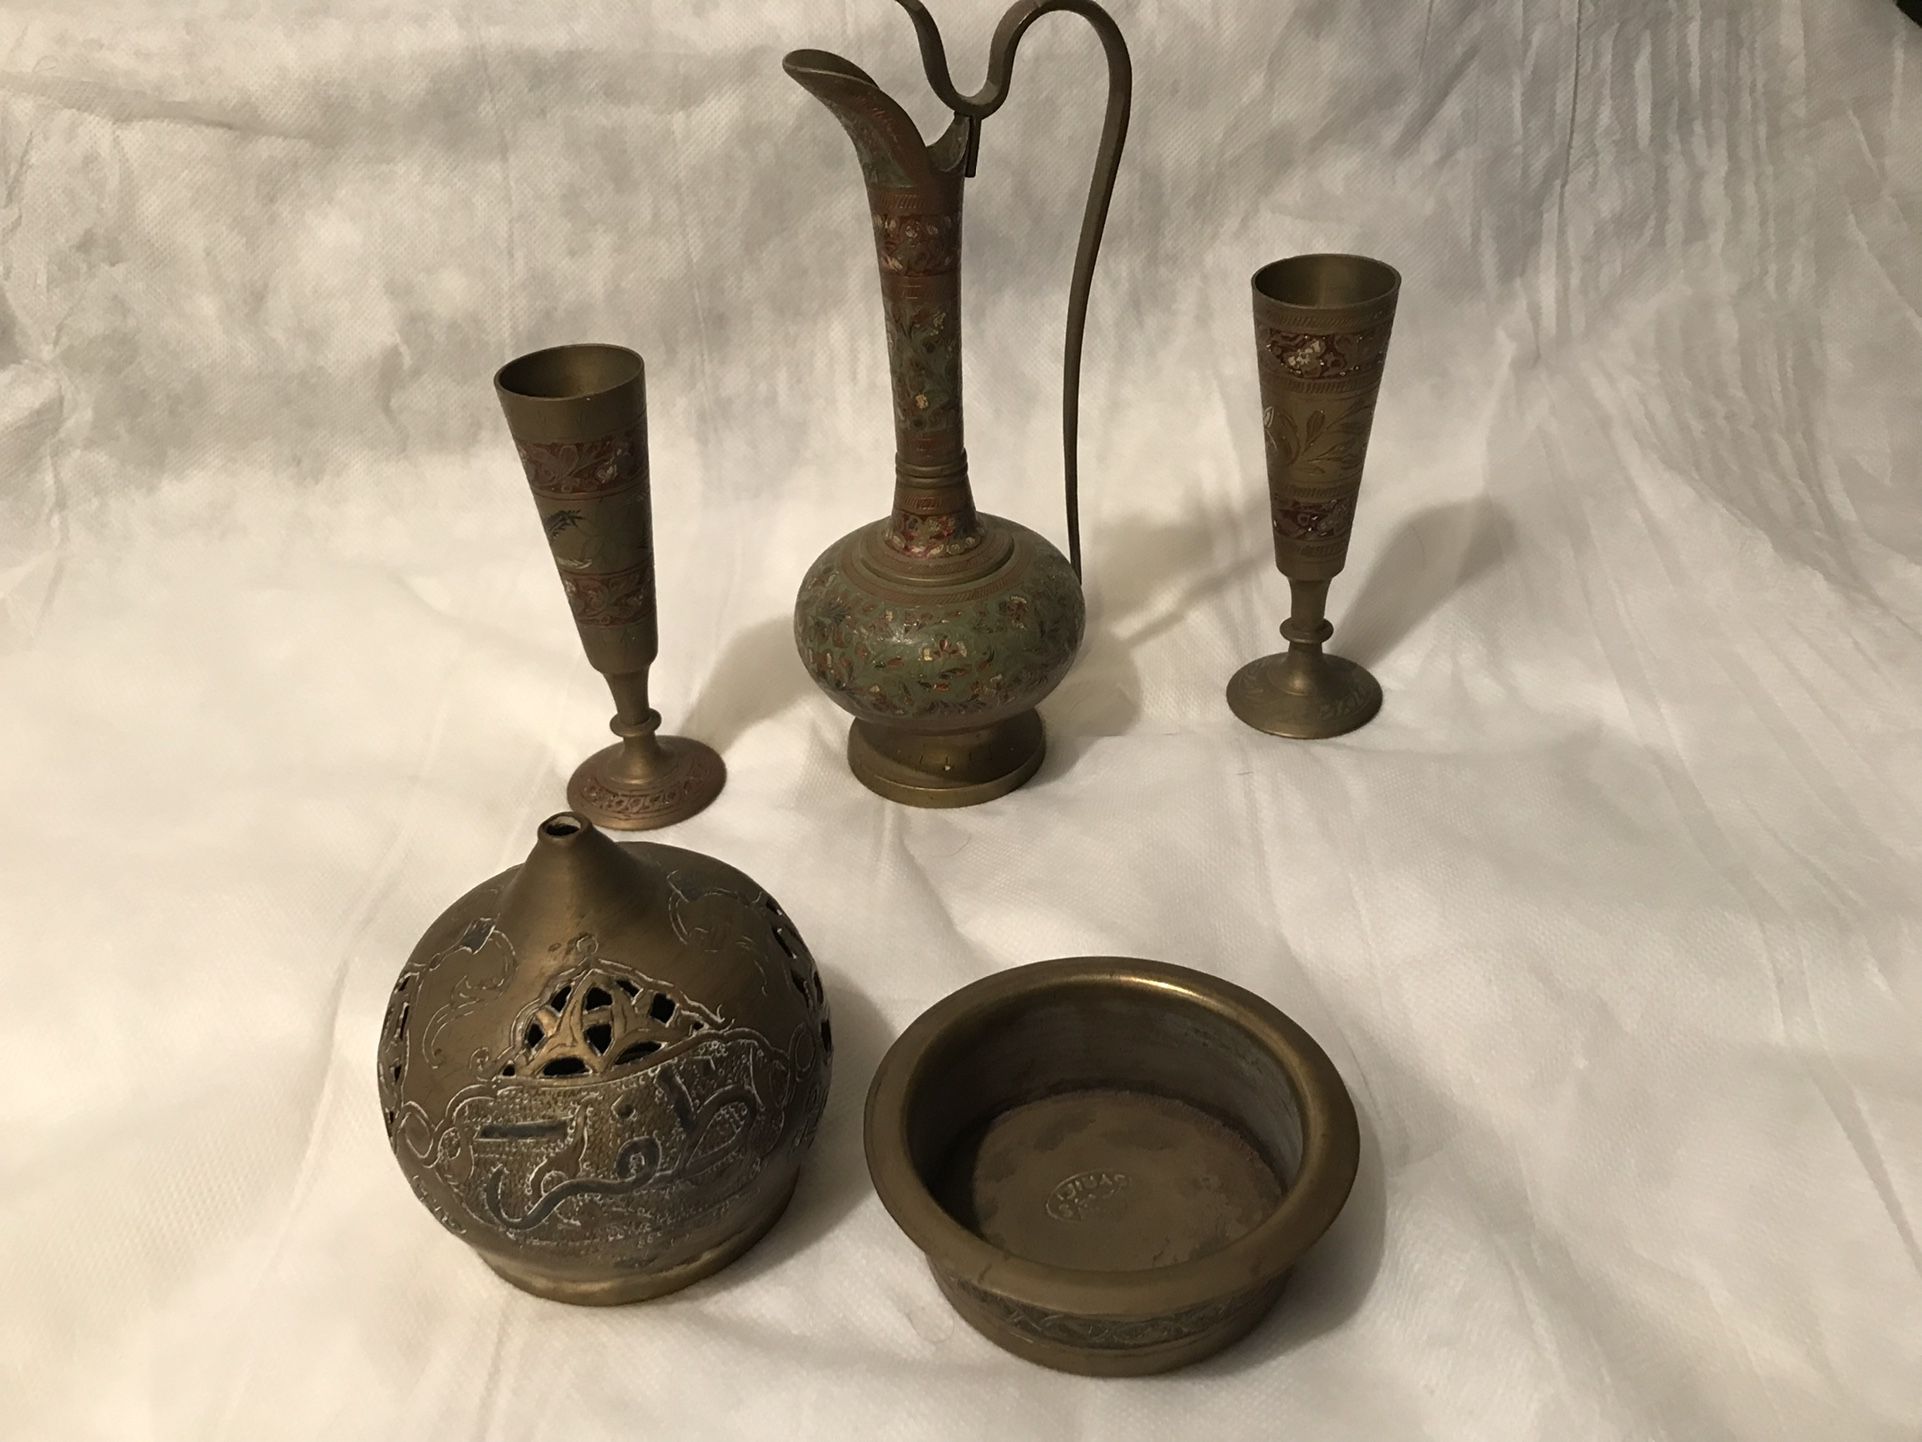 India pitcher , candle holders and Incense burner